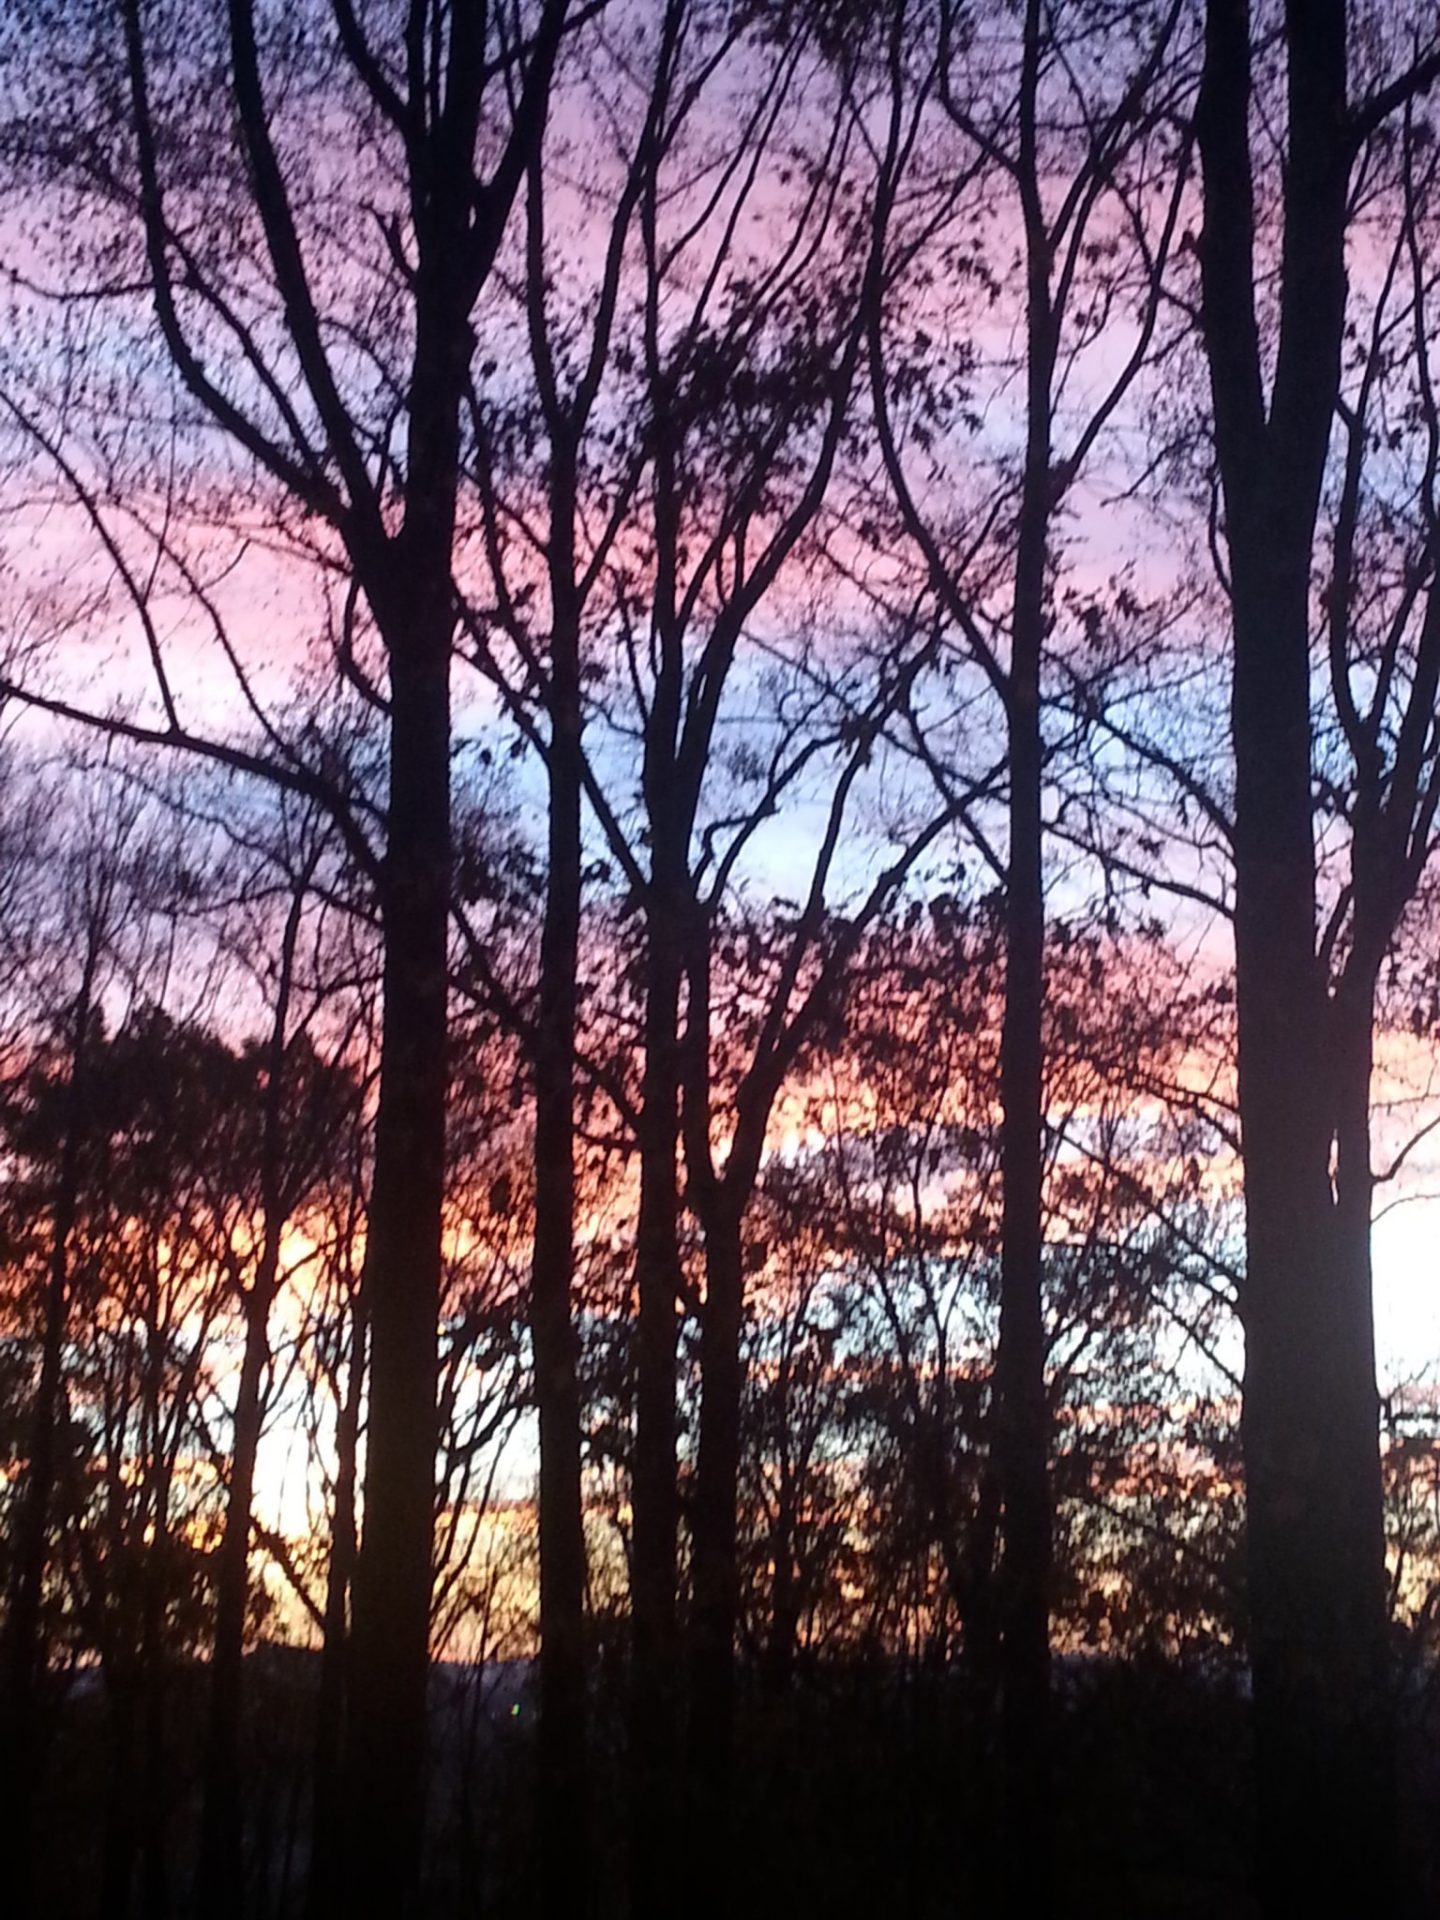 scenic view from our home in NJ, sunset memories 